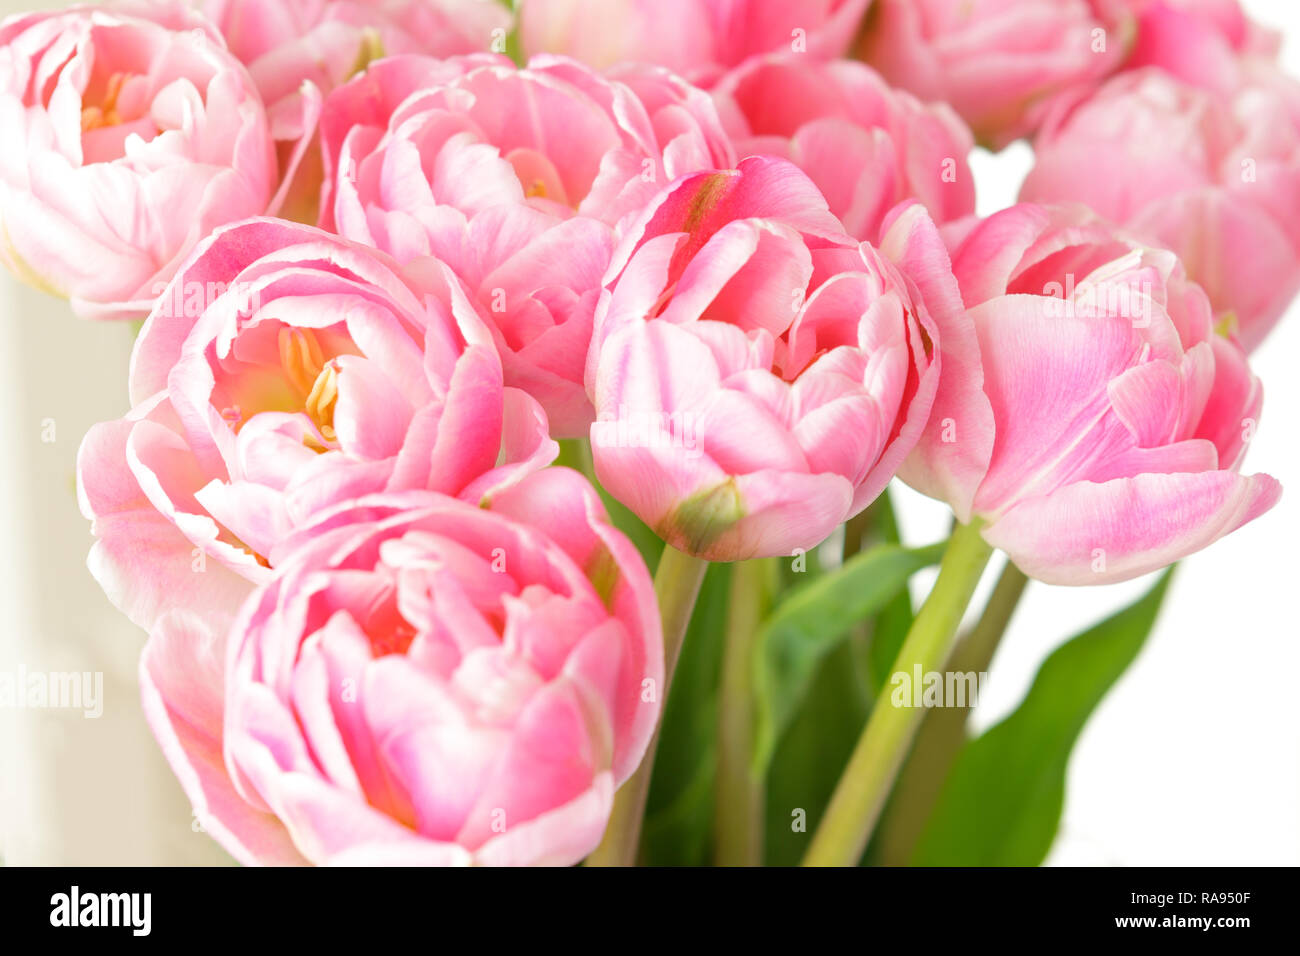 Tulip flower bouquet in shades of pink against white, nostalgic and romantic background template for florists or greeting cards Stock Photo